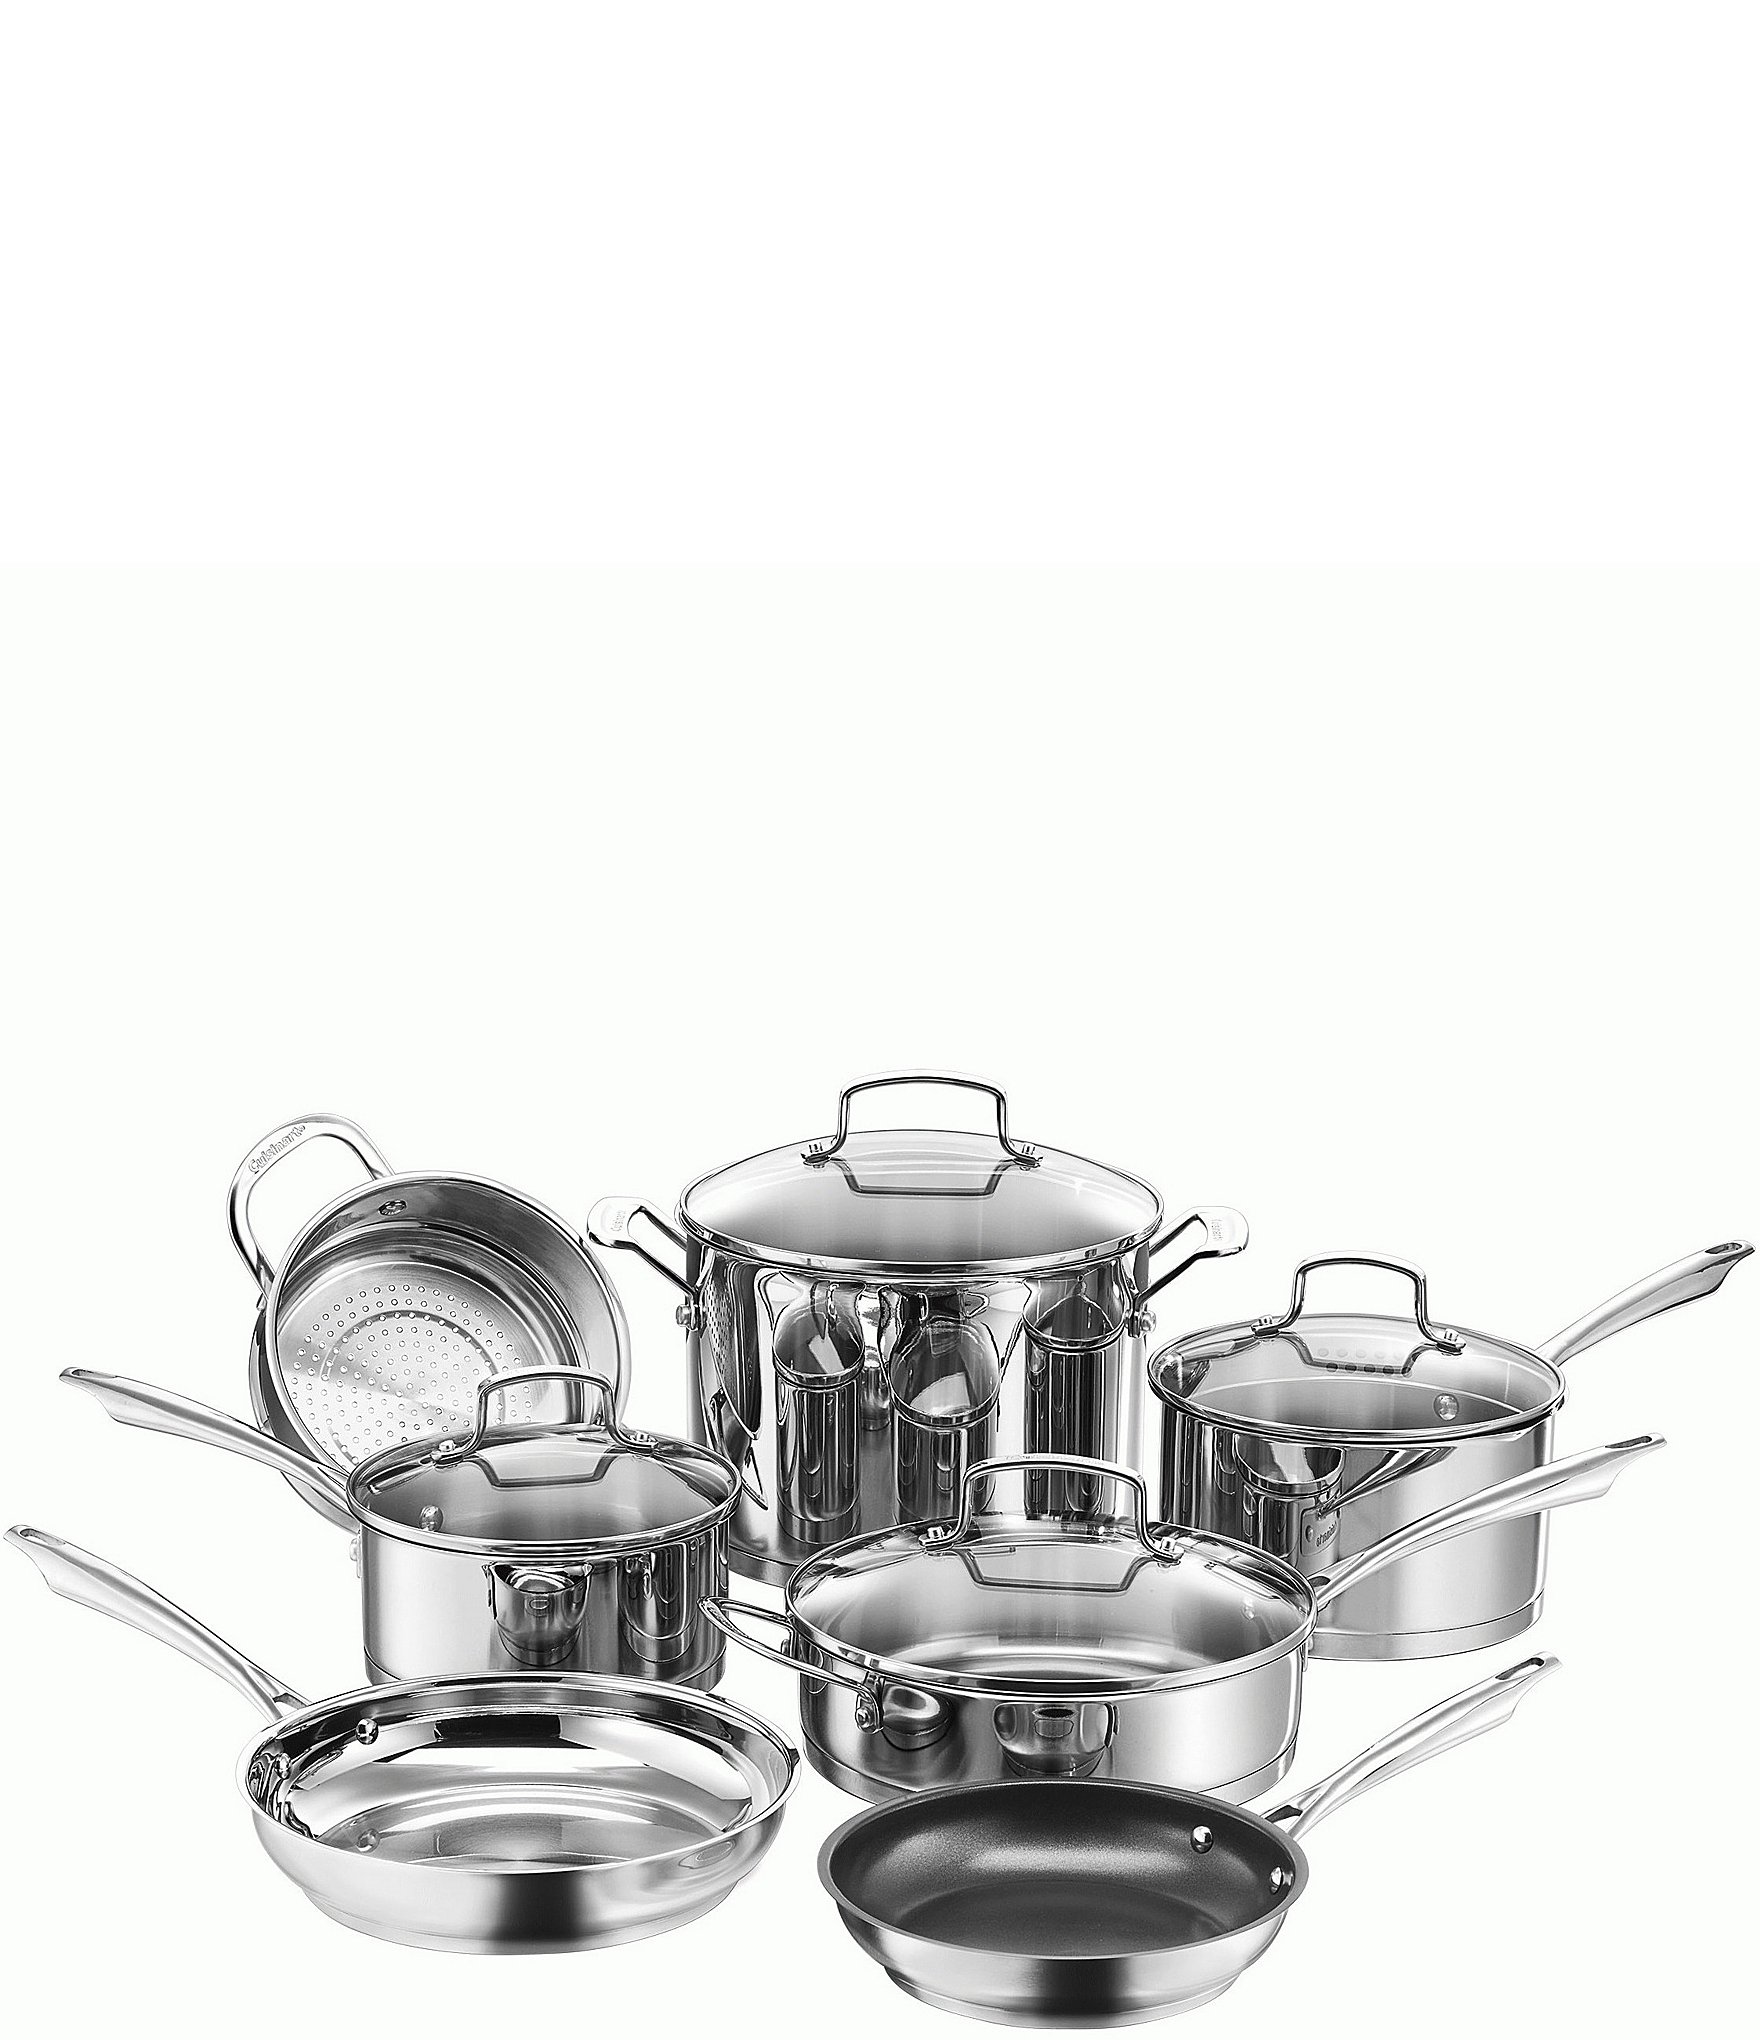 Cuisinart Chef's Classic Stainless Steel 11-Piece Cookware Set